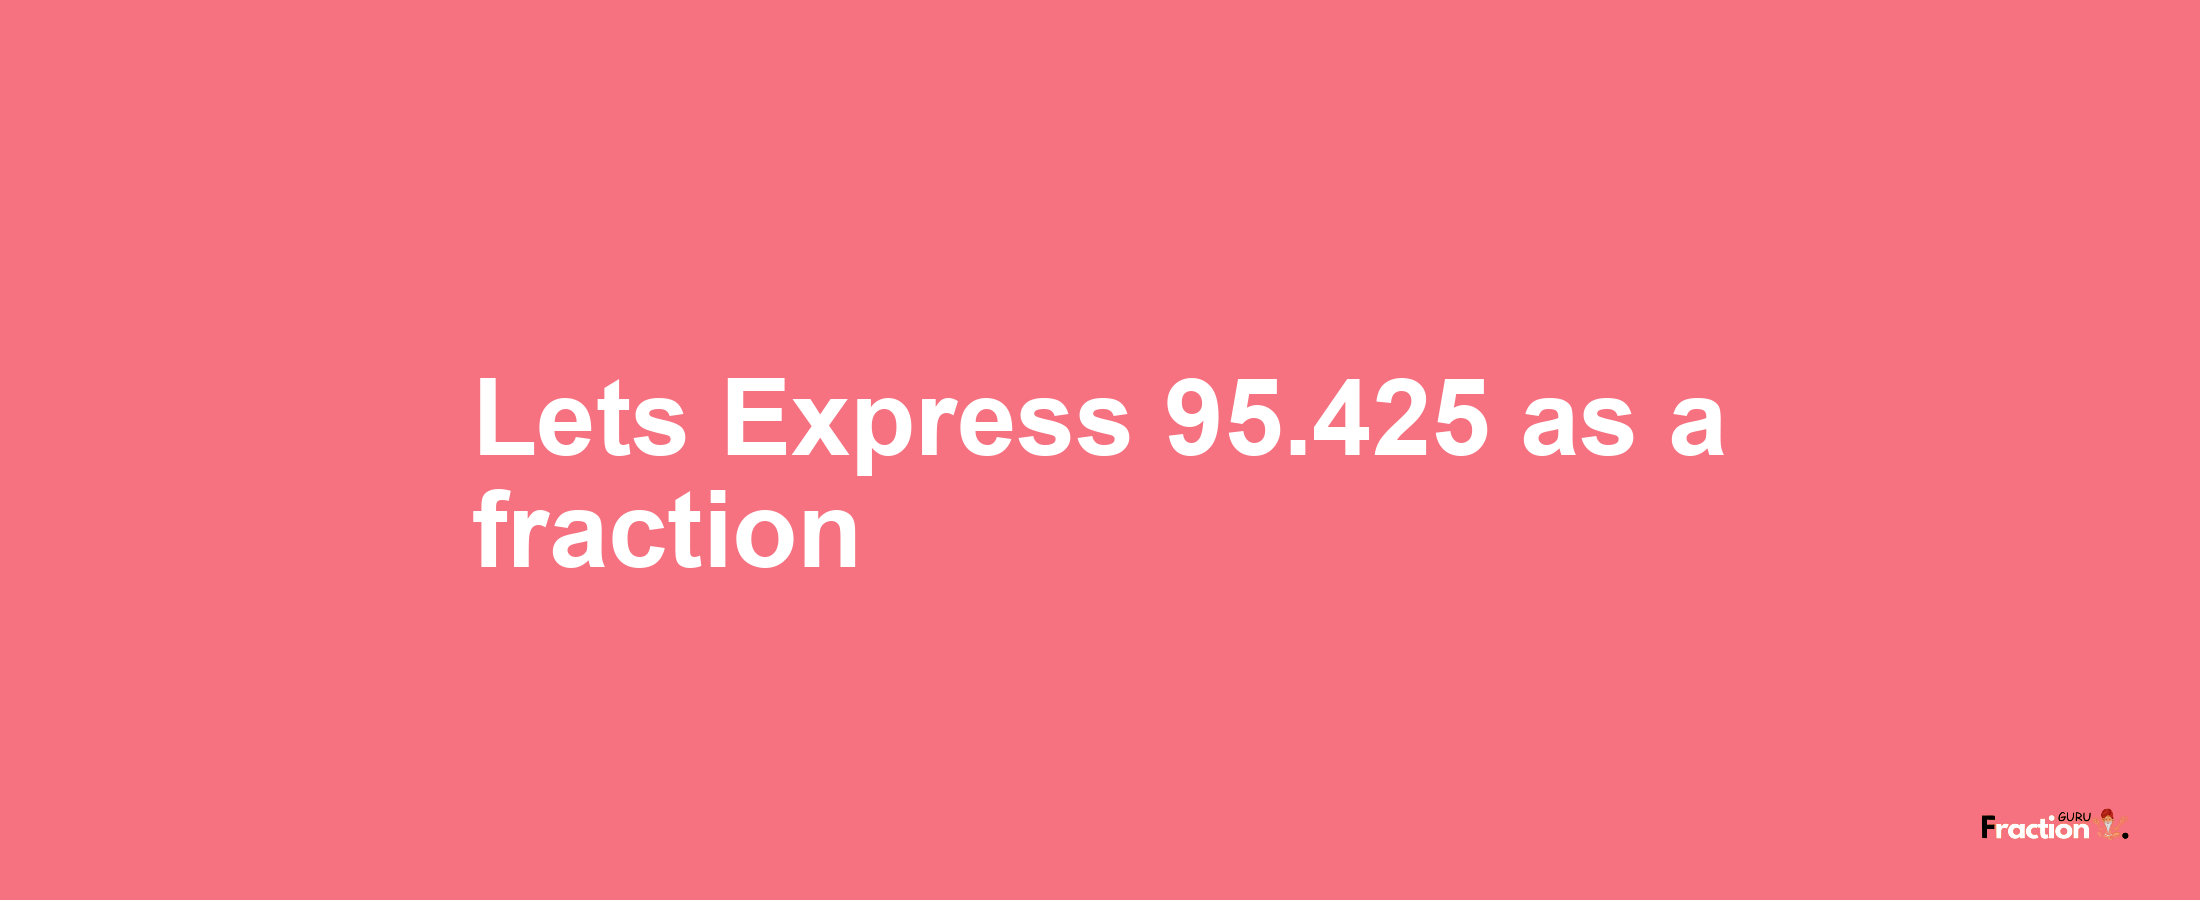 Lets Express 95.425 as afraction